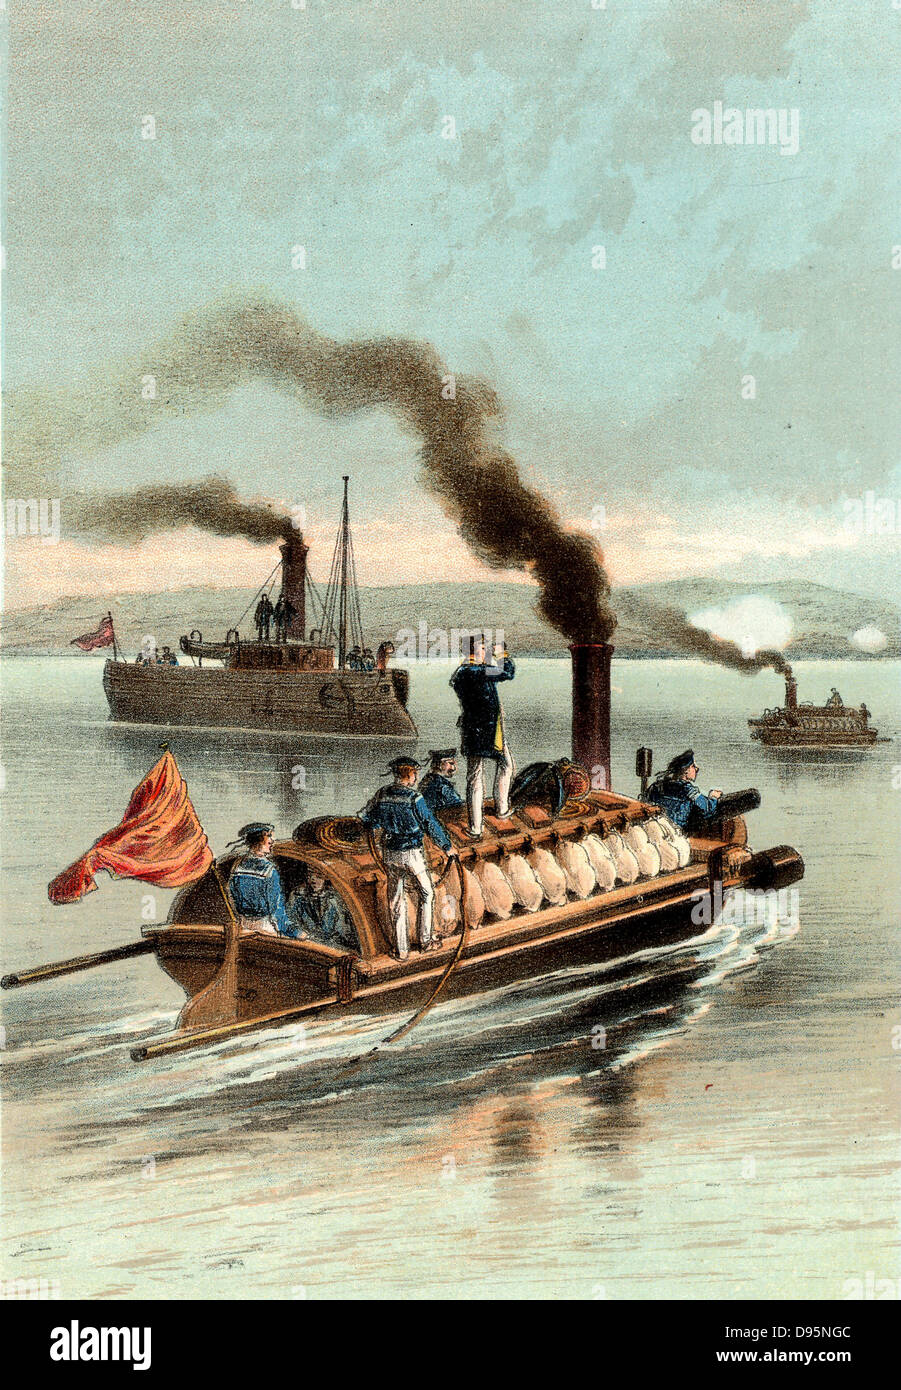 Russian torpedo boats on the Danube. Russo-Turkish War, 1877. Chromolithograph. Stock Photo